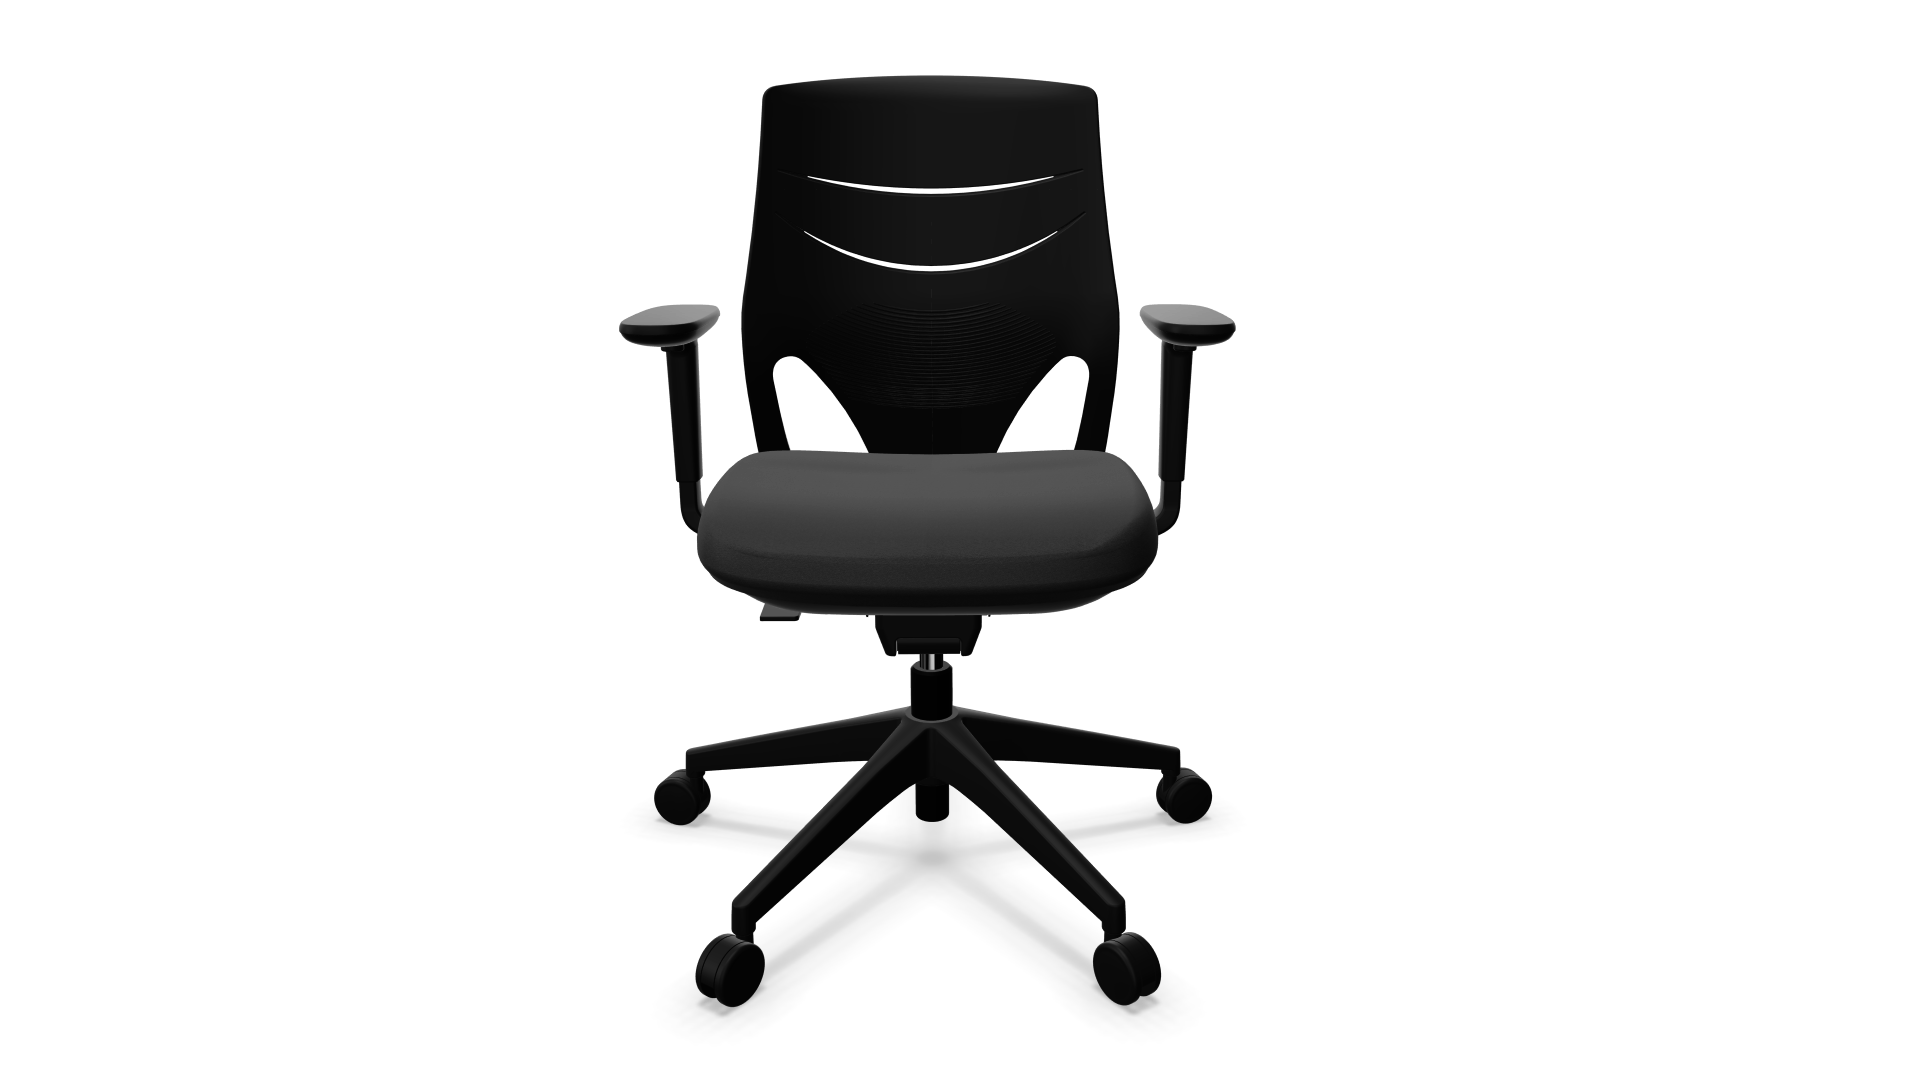 Actiu EFIT Office Chair with Black Back